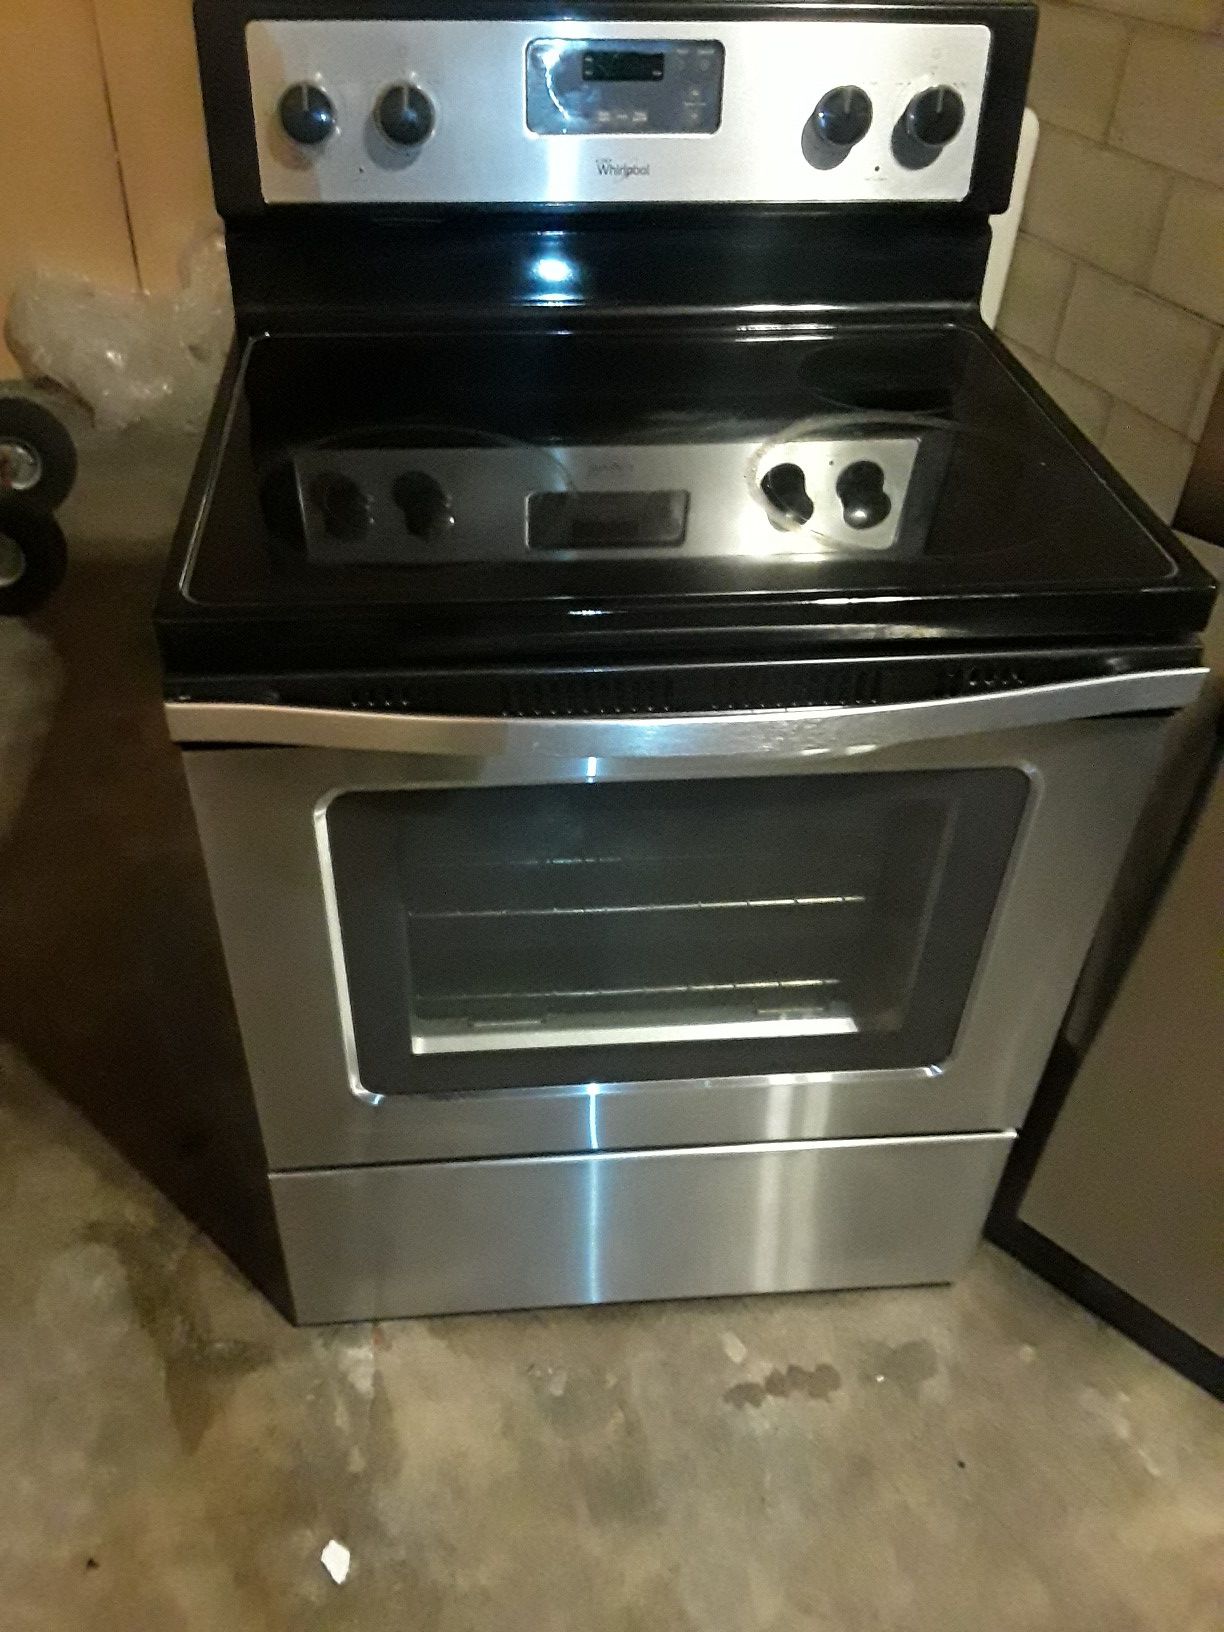 Electric stove whirlpool 220 volt nice and clean everything works 30 inches wide